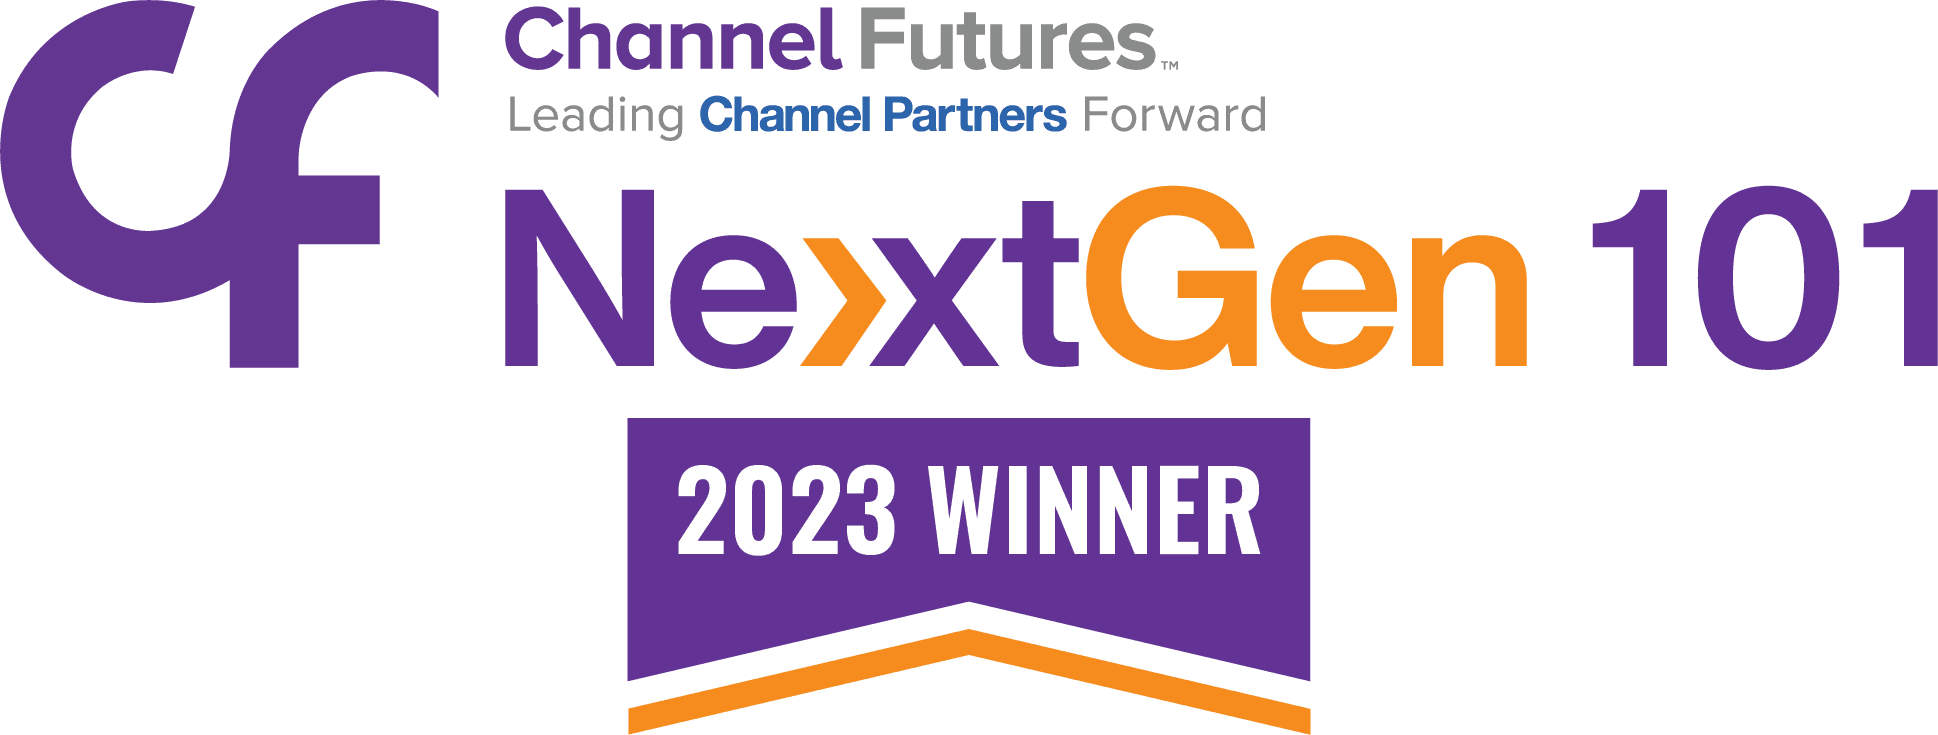 Channel Futures NextGen 2023 winner logo for top IT provider that offers cloud security assessments.